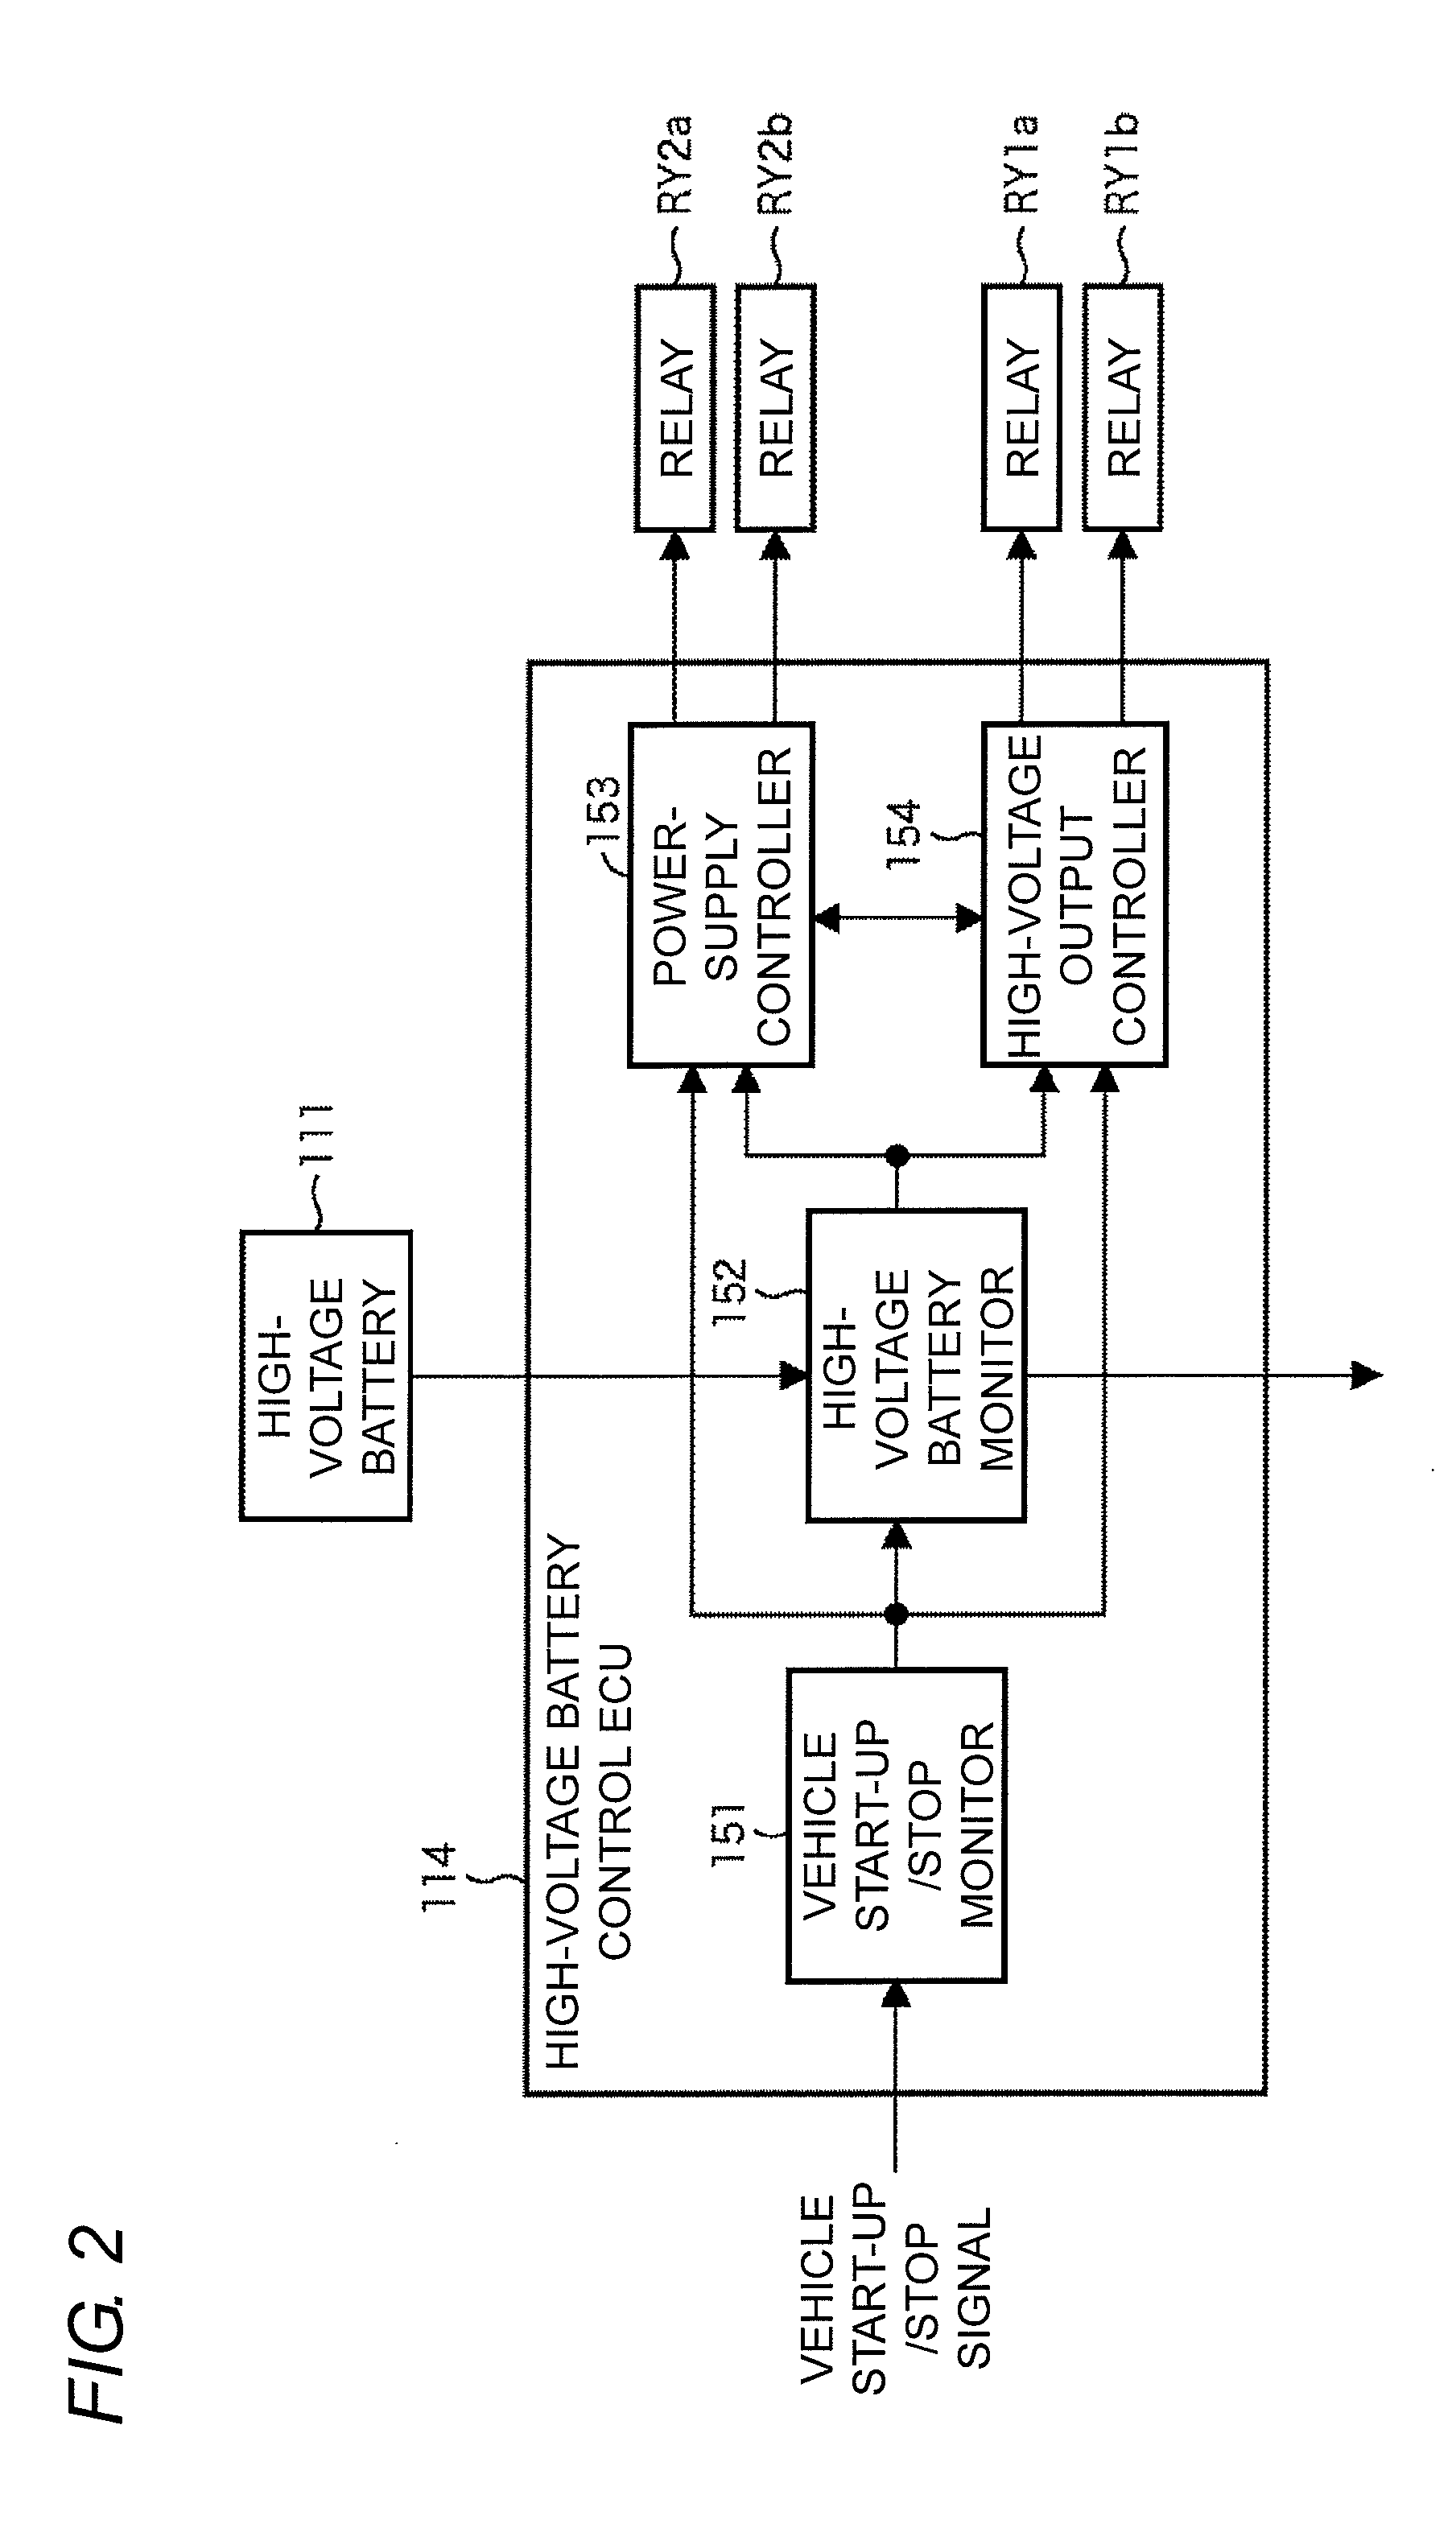 Power-supply control device